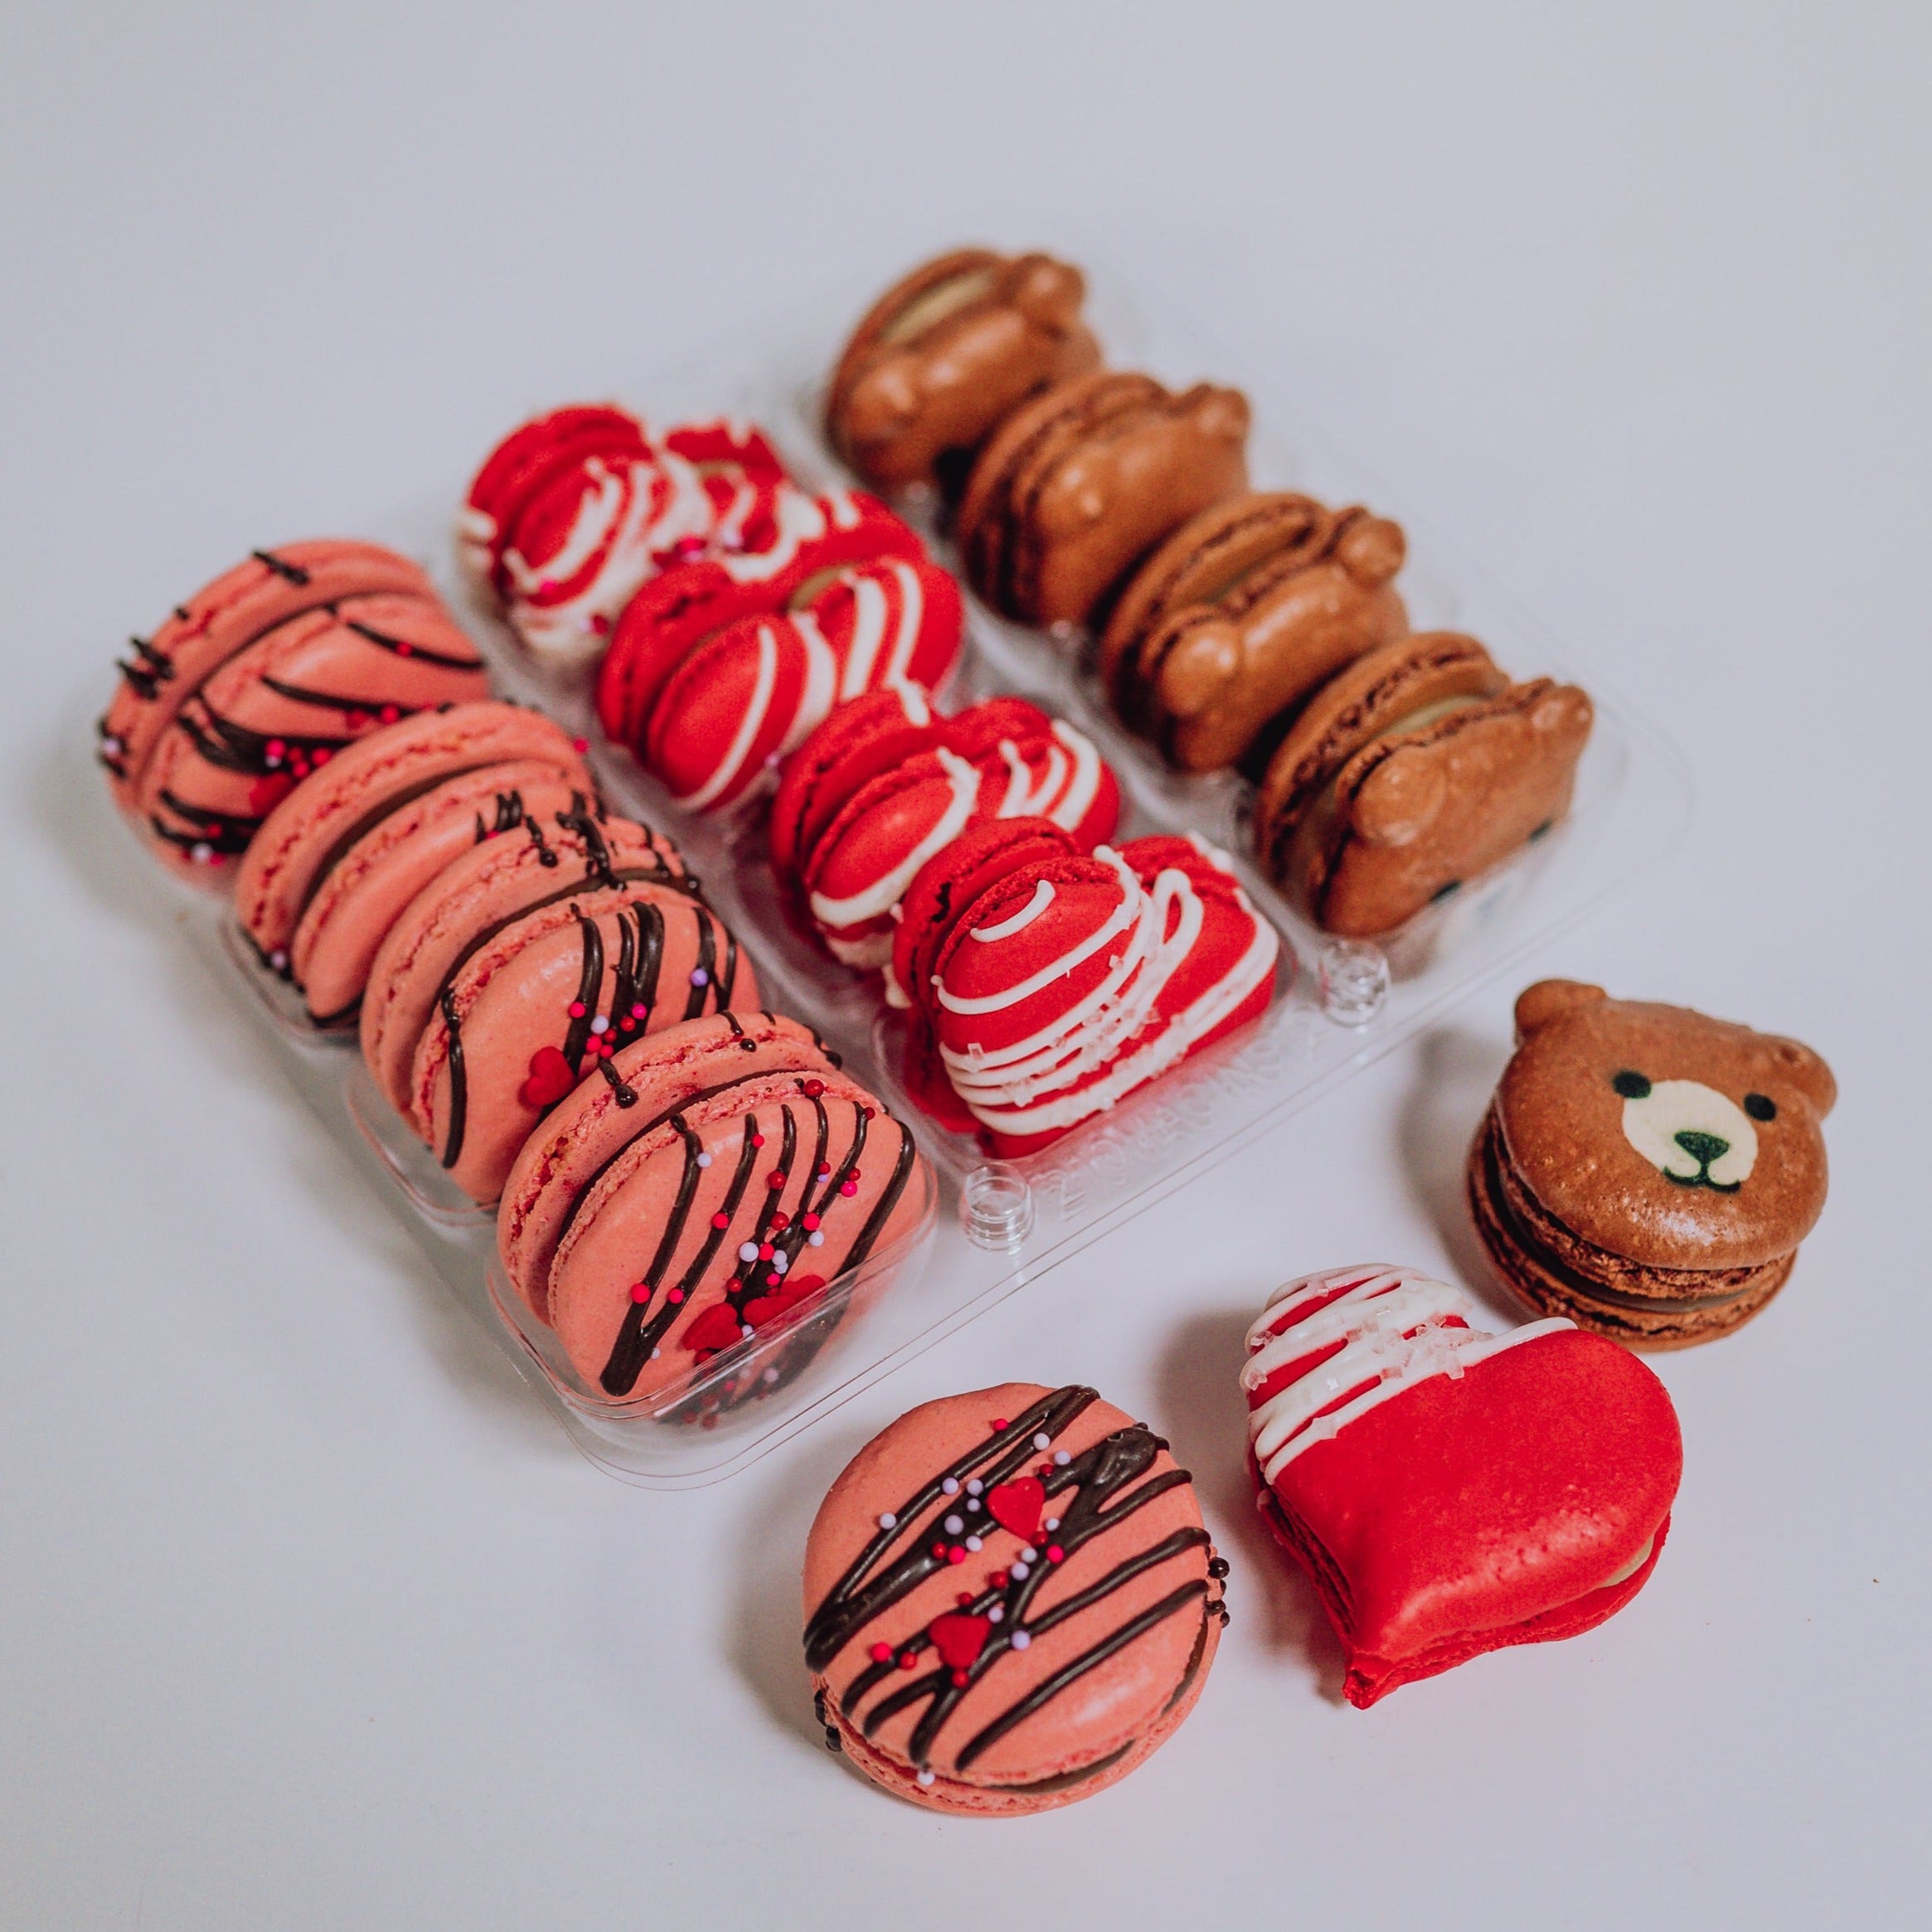 Because there are some non-edible Valentine's Day options! These super cute  pouches are 100% OKIE made! How awesome is that? @bellekitchenokc  #valentines #ValentinesDay #macaron #macarons #doughnut #doughnuts #donut  #donuts #okc #real #cute #